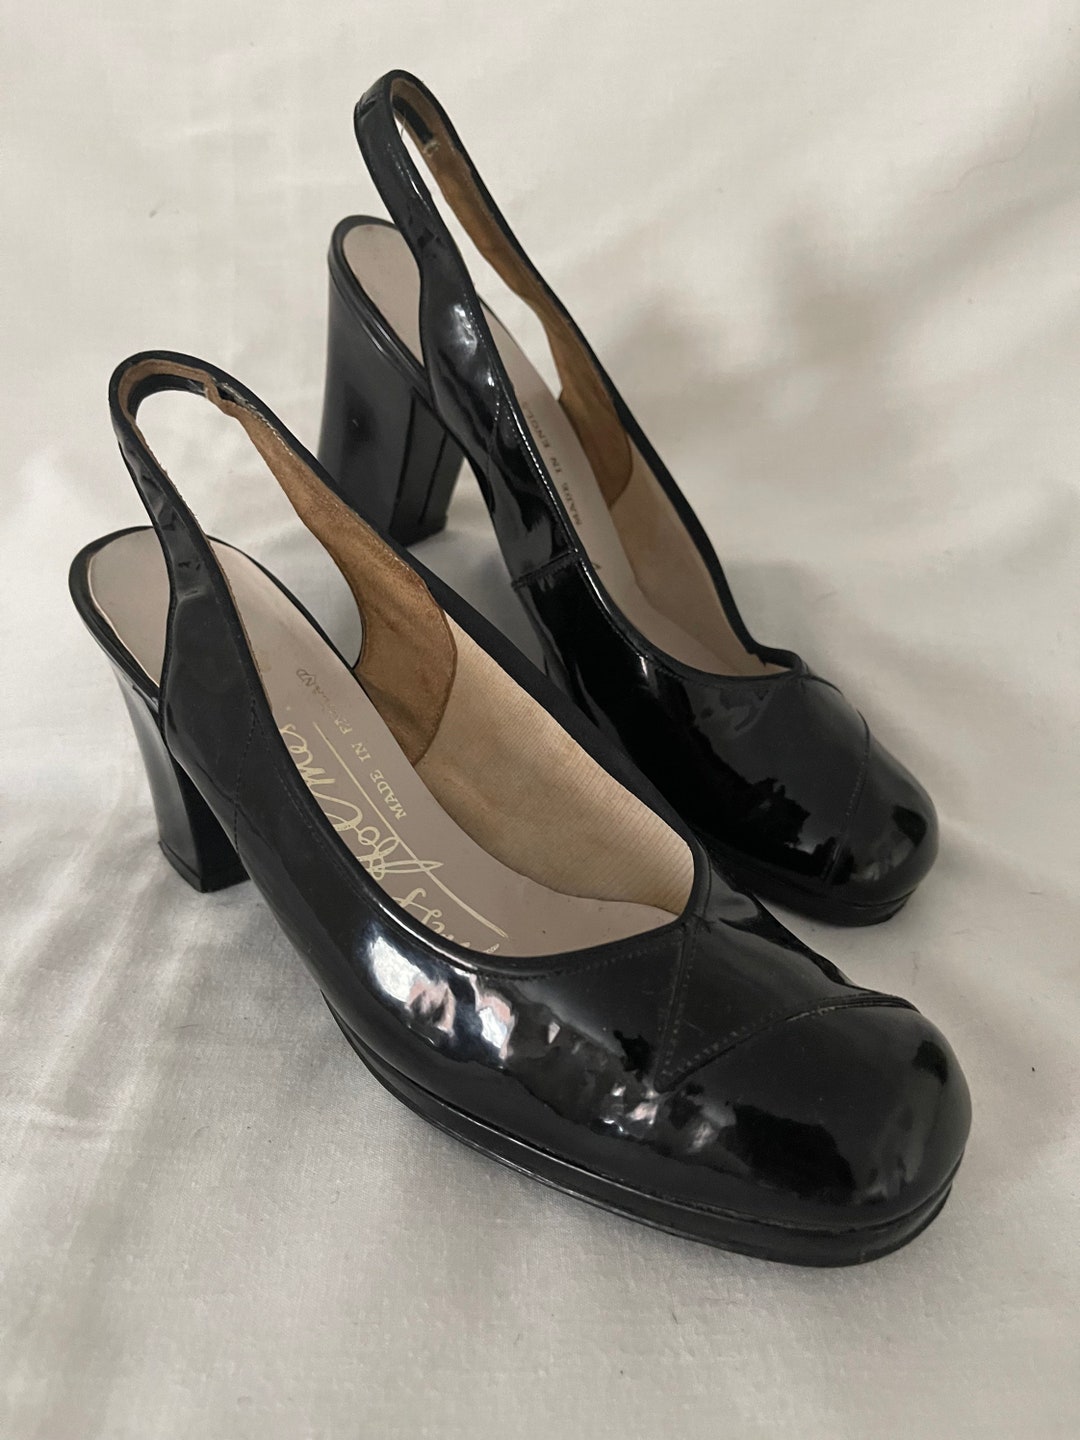 Gorgeous 1960s miss Holmes Patent Leather Sling Backs - Etsy